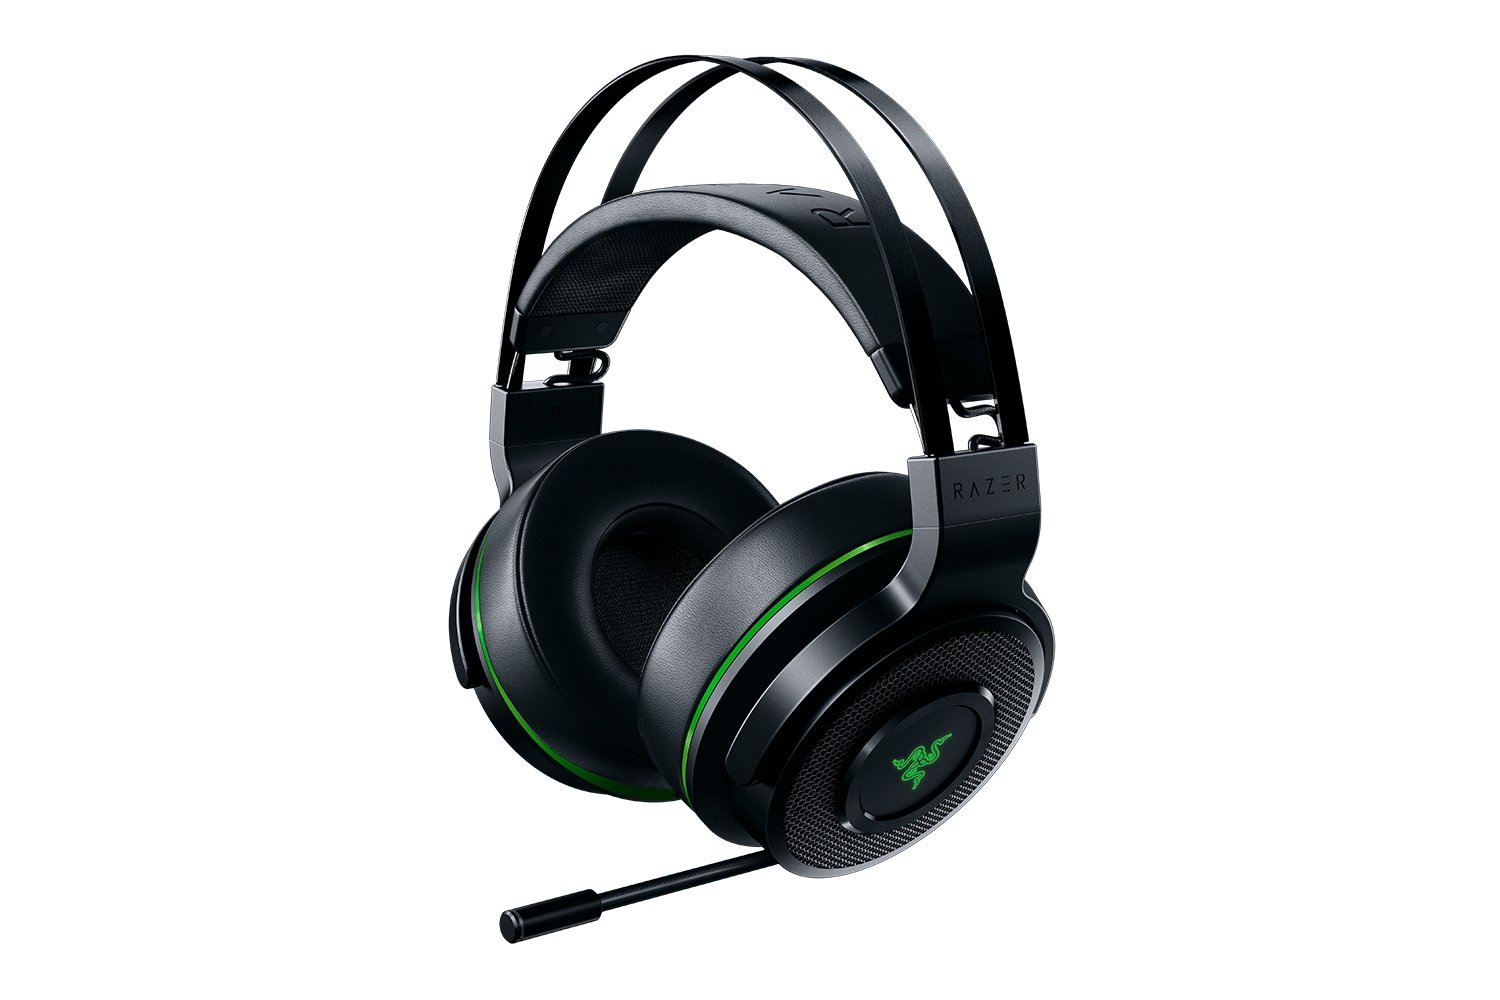 Razer Thresher For Xbox One: Windows Sonic Surround - Lag-Free Wireless Connection - Retractable Digital Microphone - Gaming Headset For PC, Xbox One, Xbox Series X & S for $89.99